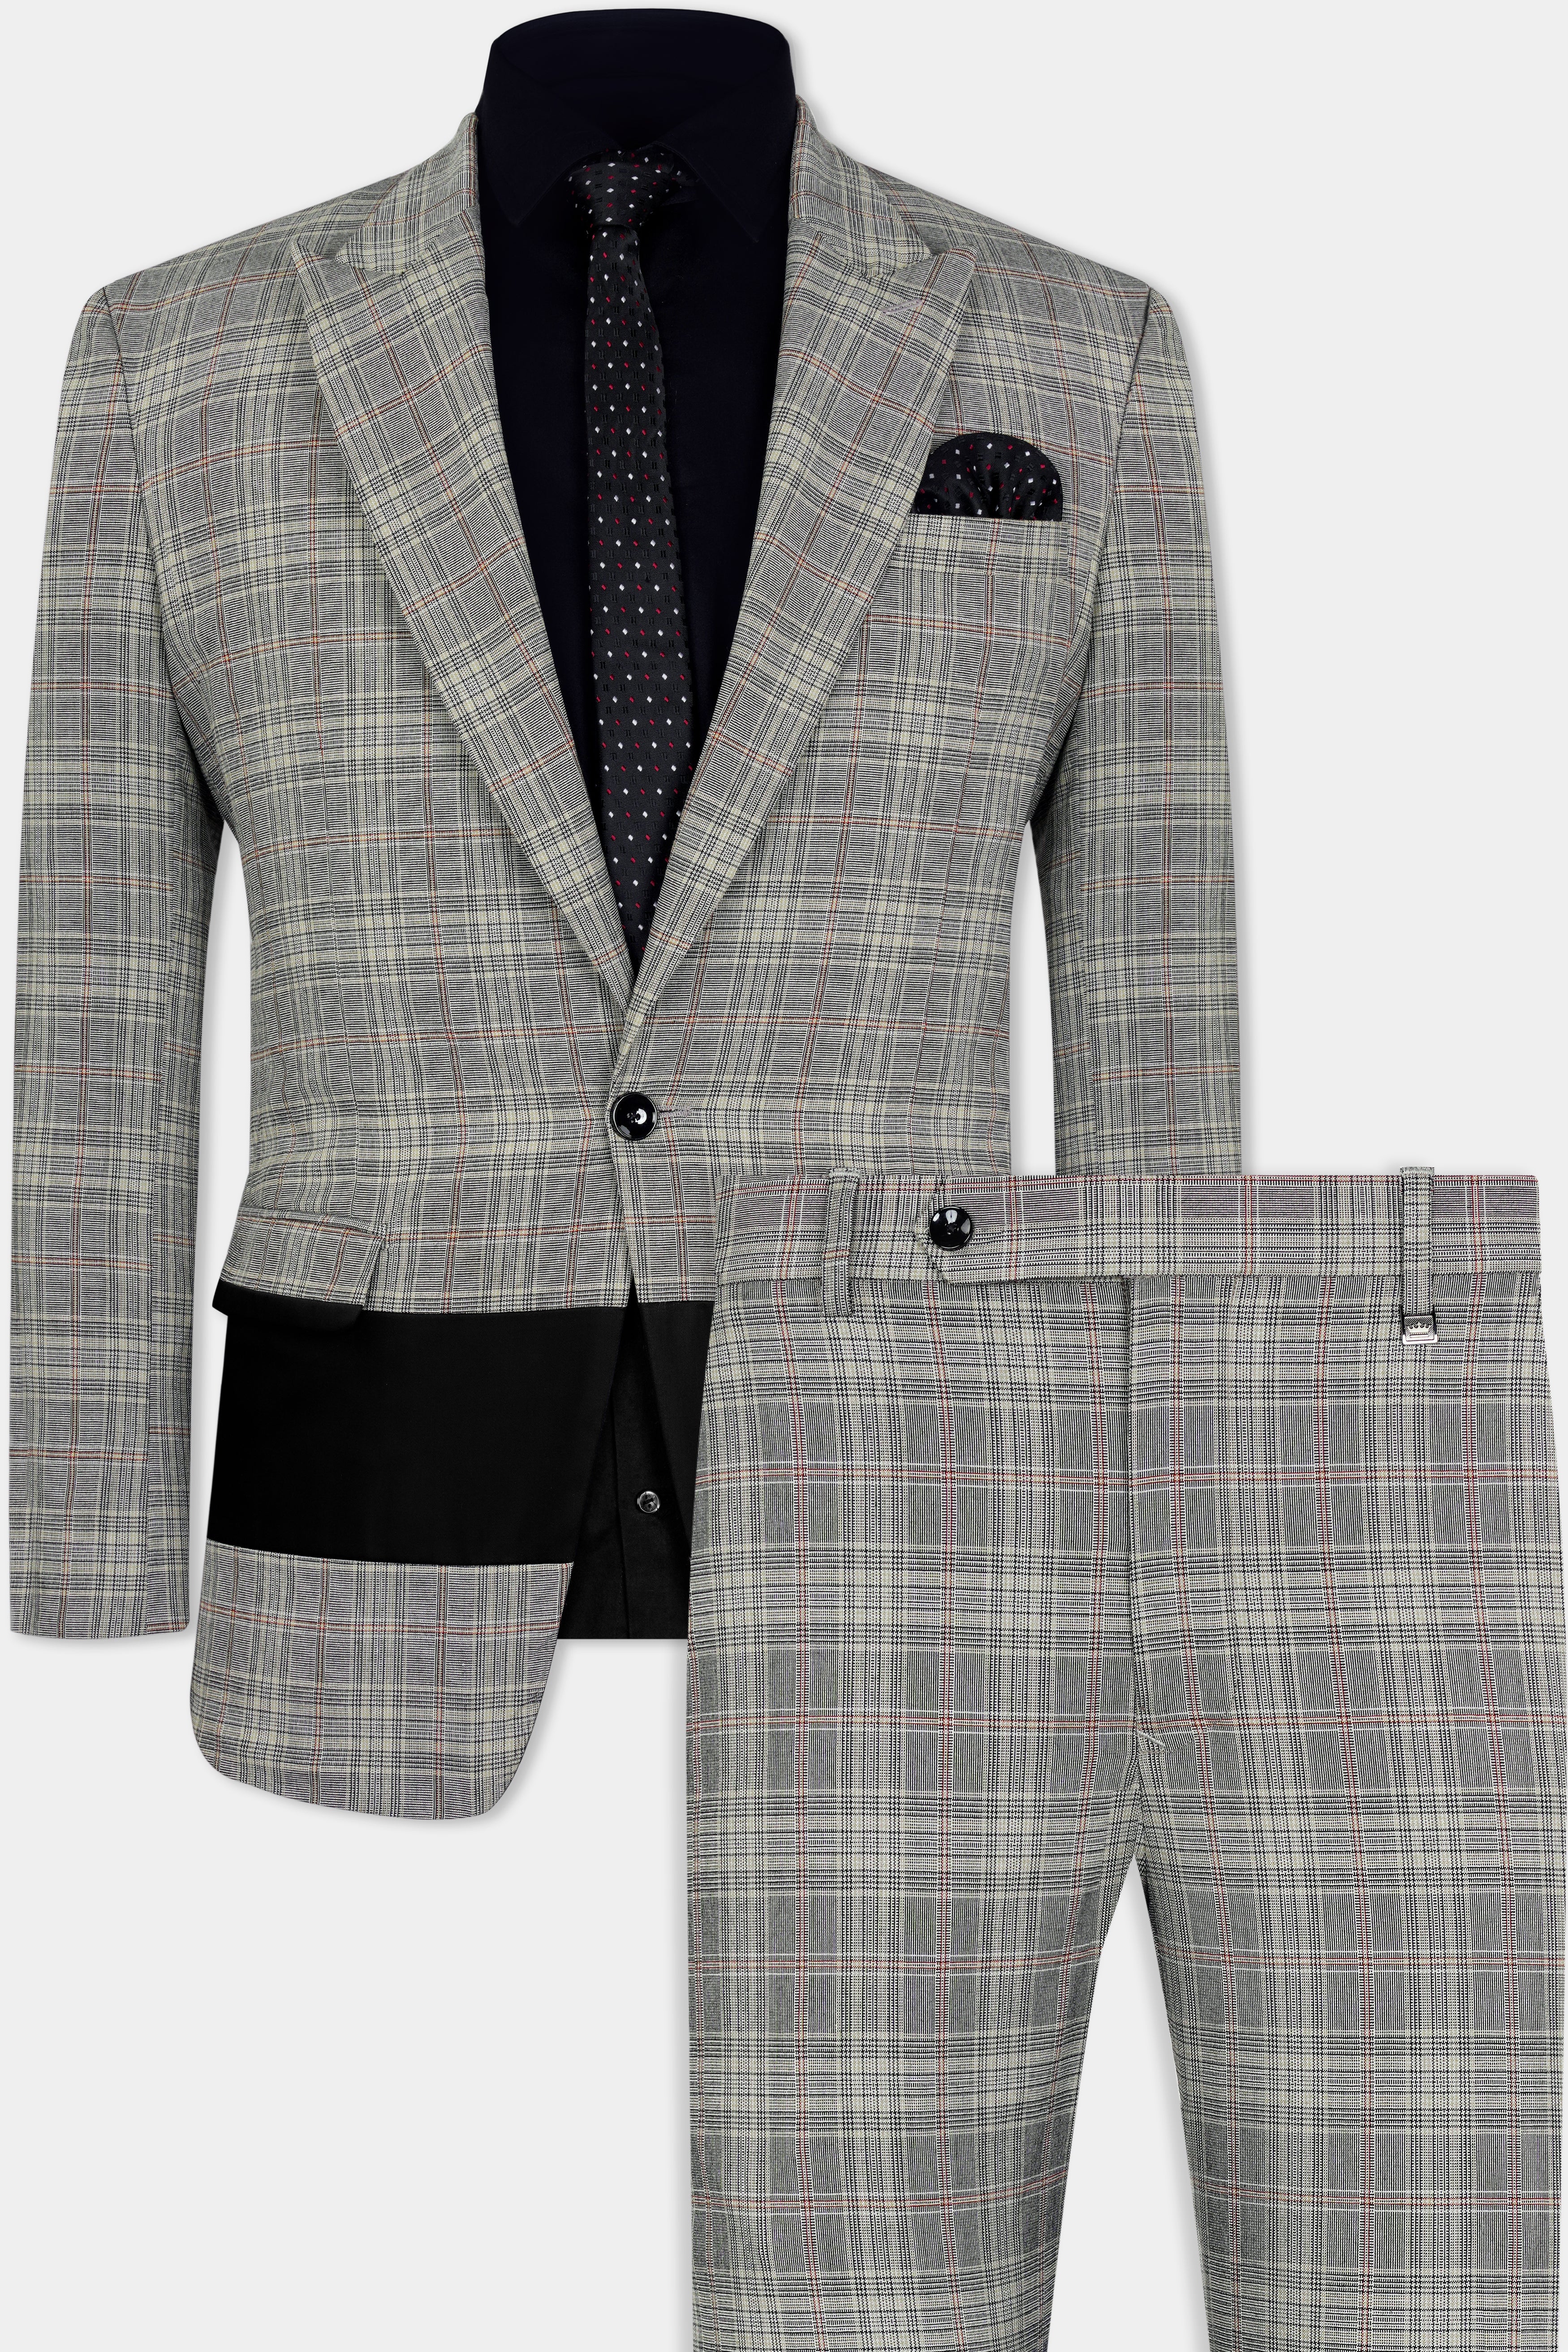 Chalice Gray Plaid and Black Wool Rich Designer Suit ST2928-SBP-D73-36,ST2928-SBP-D73-38,ST2928-SBP-D73-40,ST2928-SBP-D73-42,ST2928-SBP-D73-44,ST2928-SBP-D73-46,ST2928-SBP-D73-48,ST2928-SBP-D73-50,ST2928-SBP-D73-52,ST2928-SBP-D73-54,ST2928-SBP-D73-56,ST2928-SBP-D73-58,ST2928-SBP-D73-60